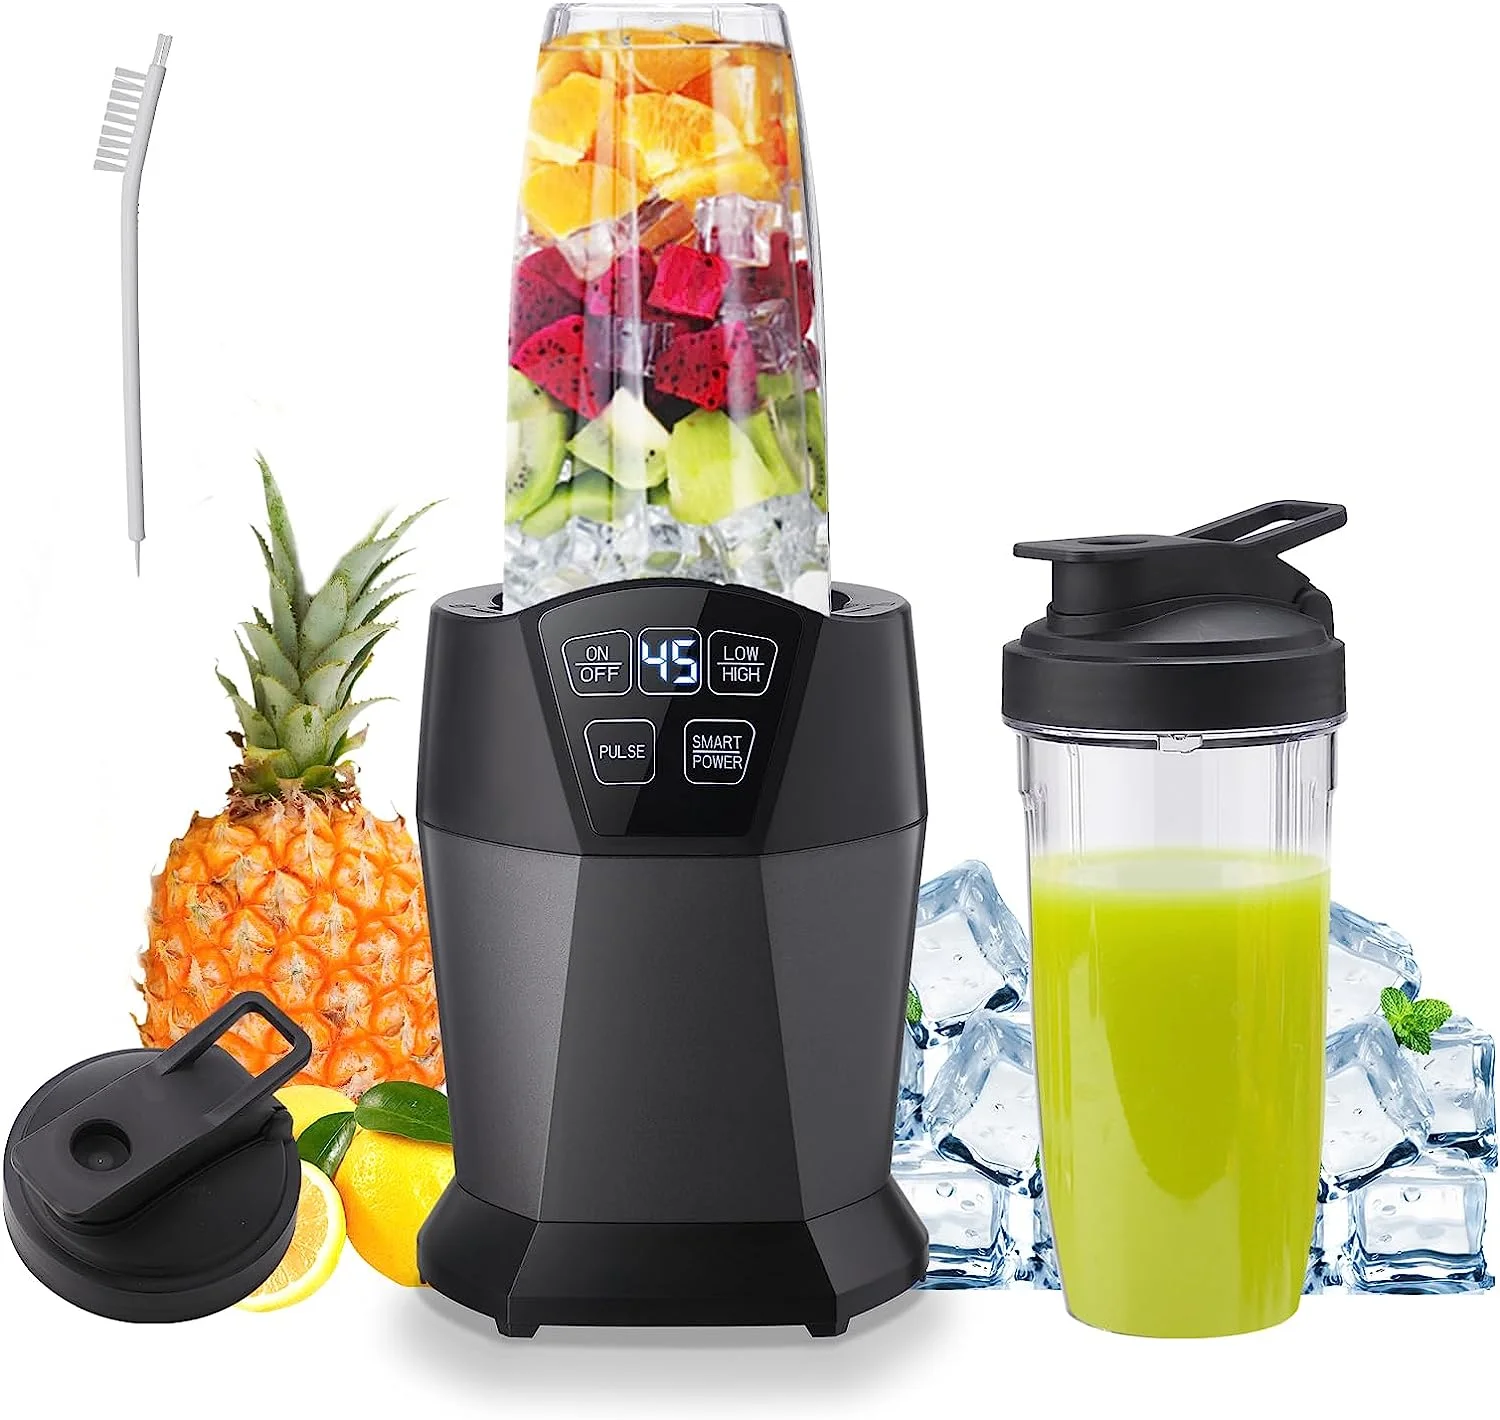 

& Lecker Personal Blender with 1200-Peak-Watts, Smart technology for frozen Drinks, Shakes, Smoothies & Sauces, with two 28-oz T